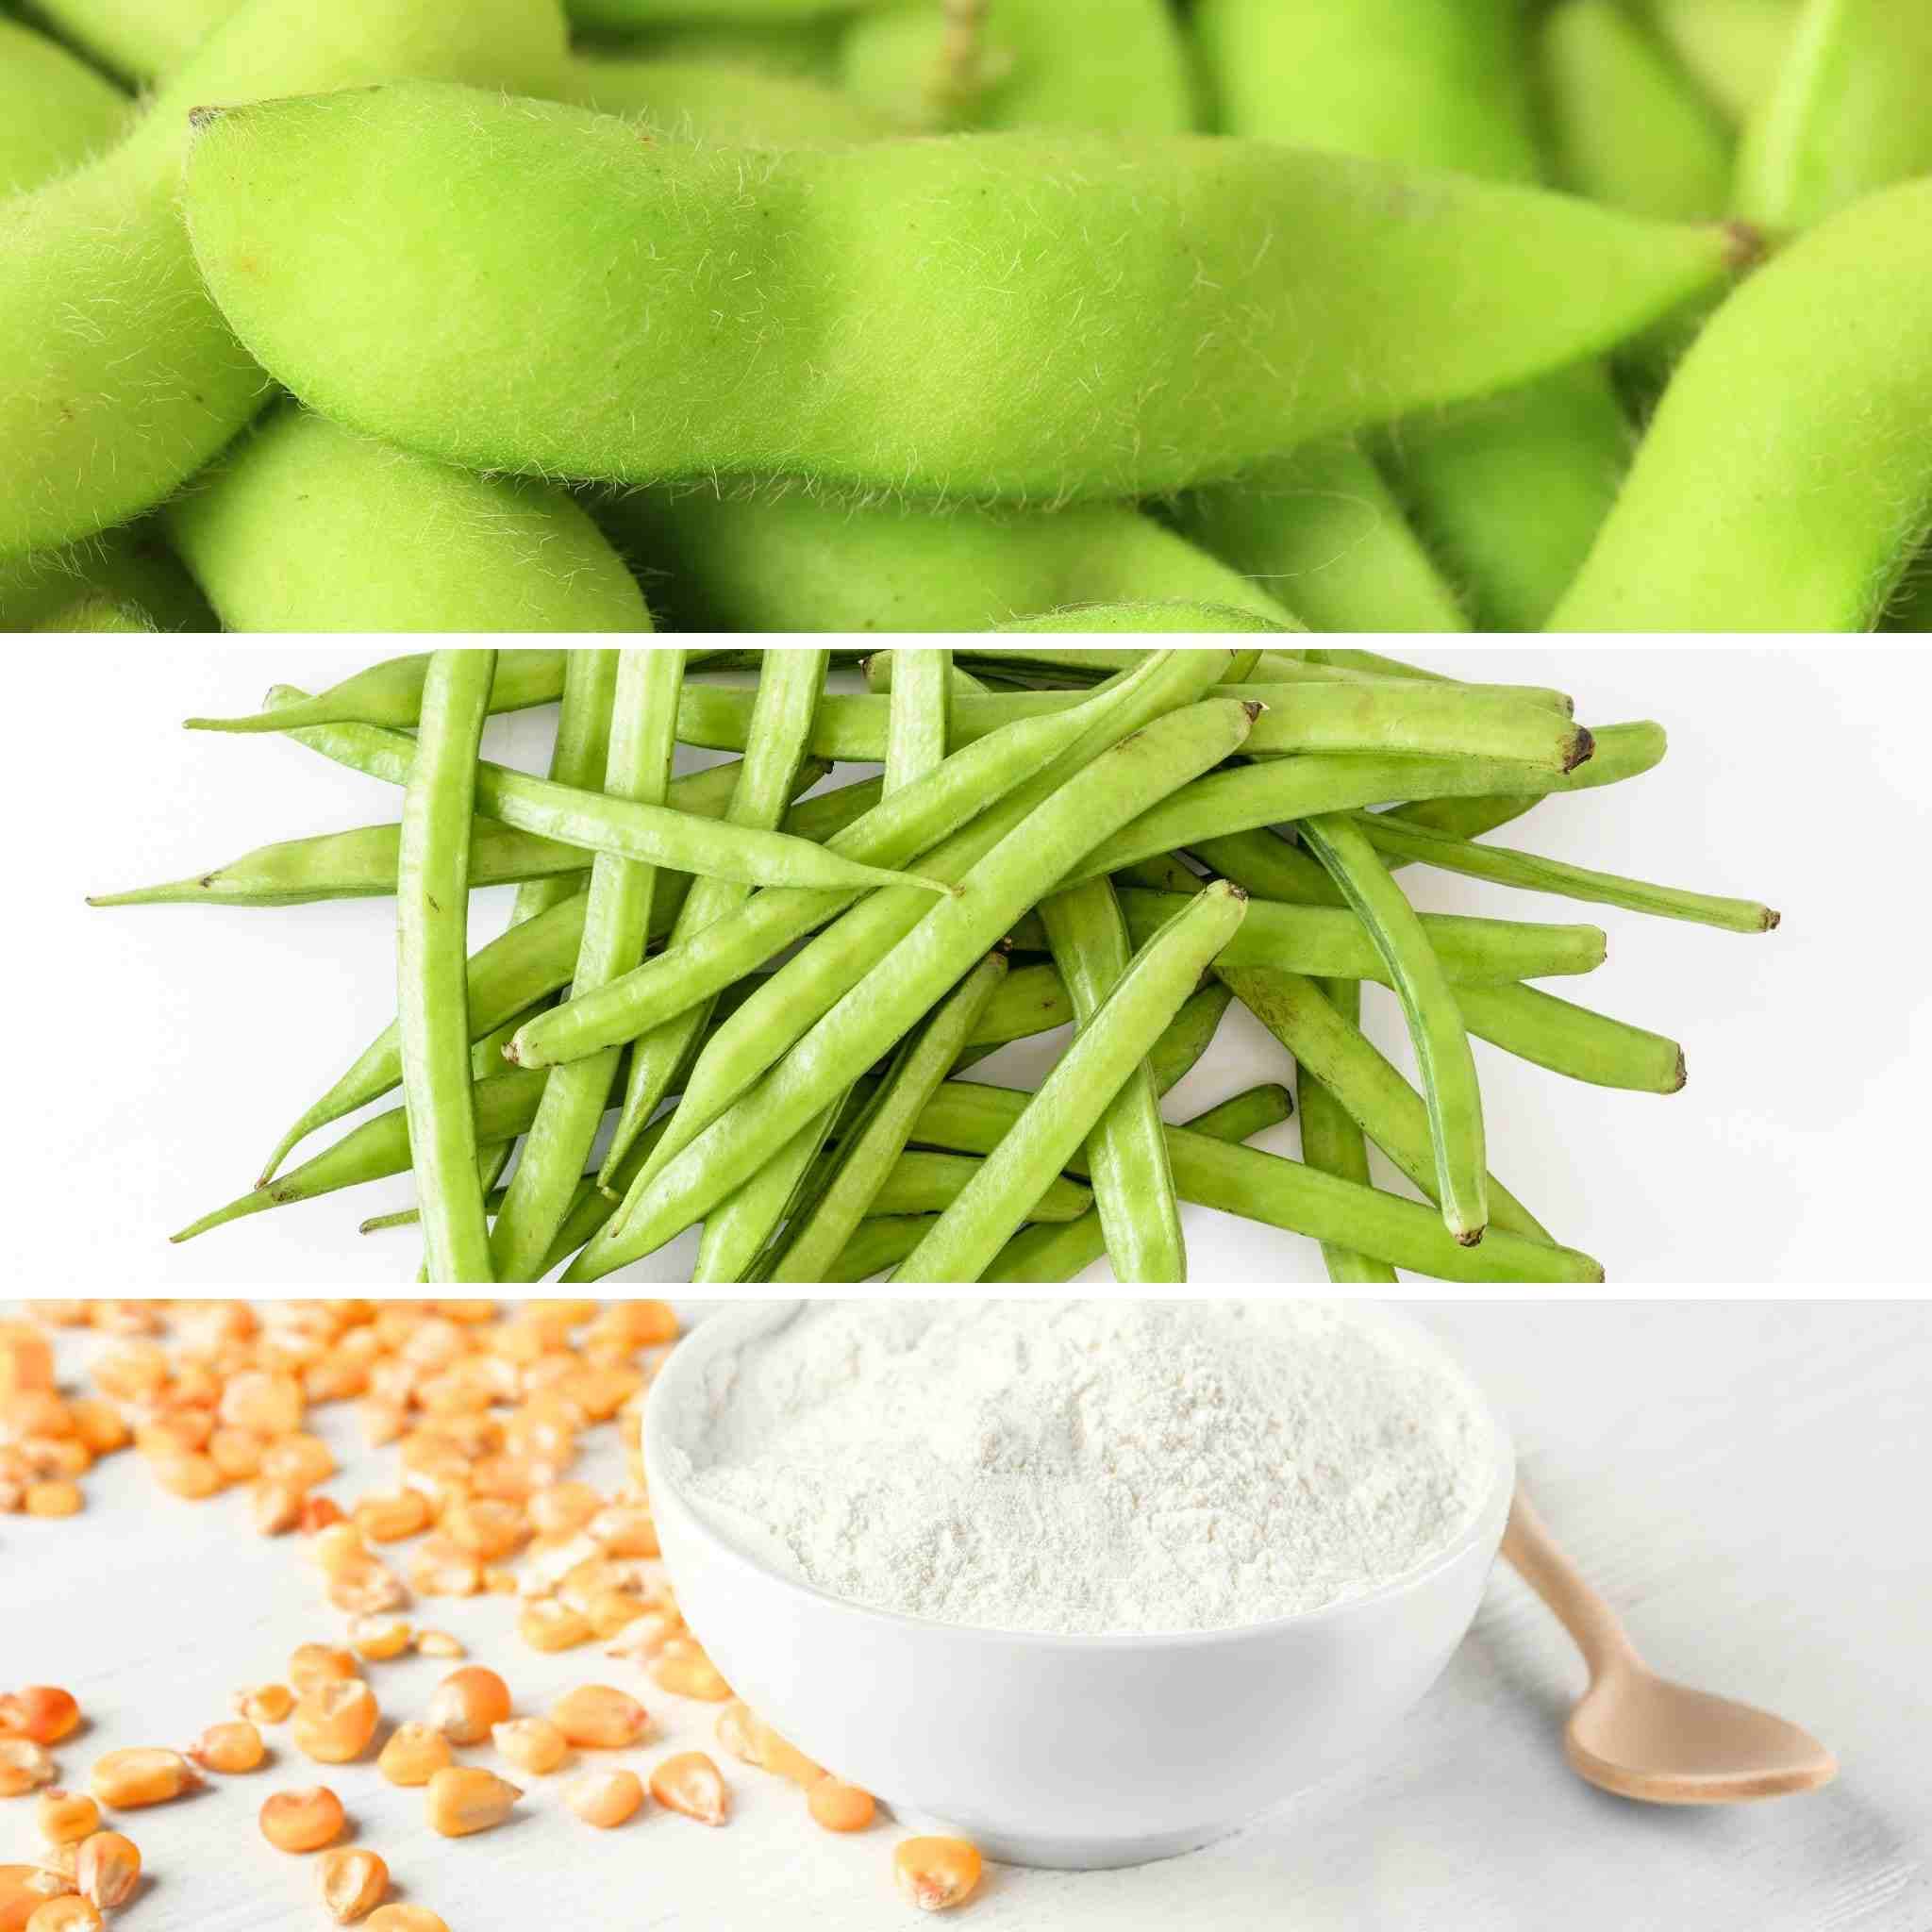 Collage of tofu cat litter ingredients: fresh green soybeans in pods at the top, guar beans in the middle, and cornstarch in a bowl at the bottom, symbolizing natural and organic sources.